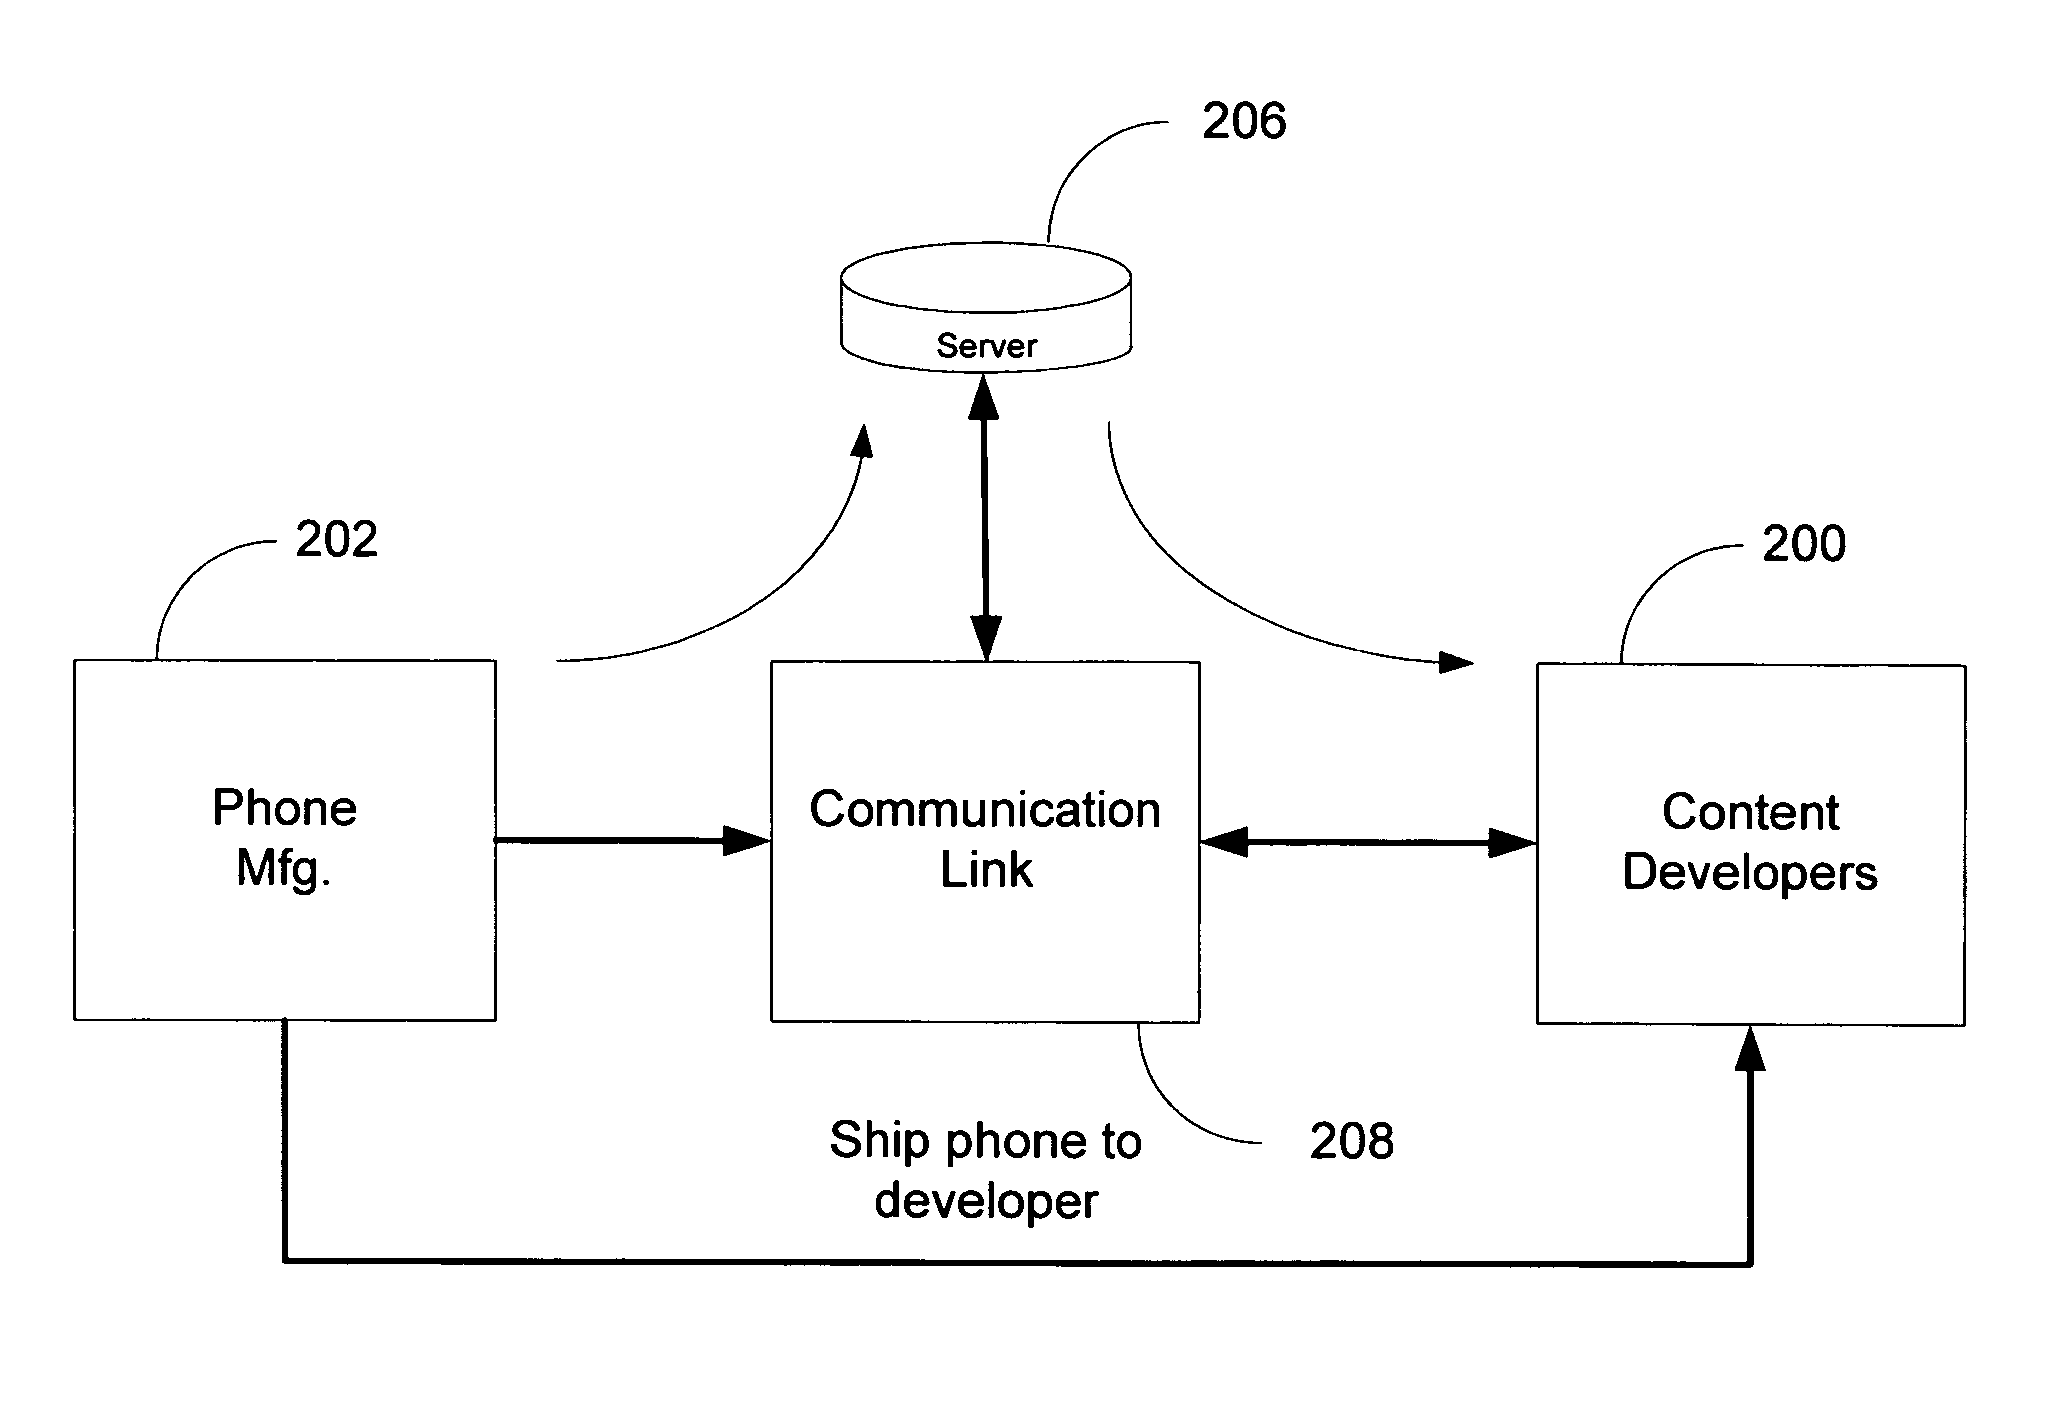 Systems and methods for rapidly enabling brew-based wireless handsets for content development